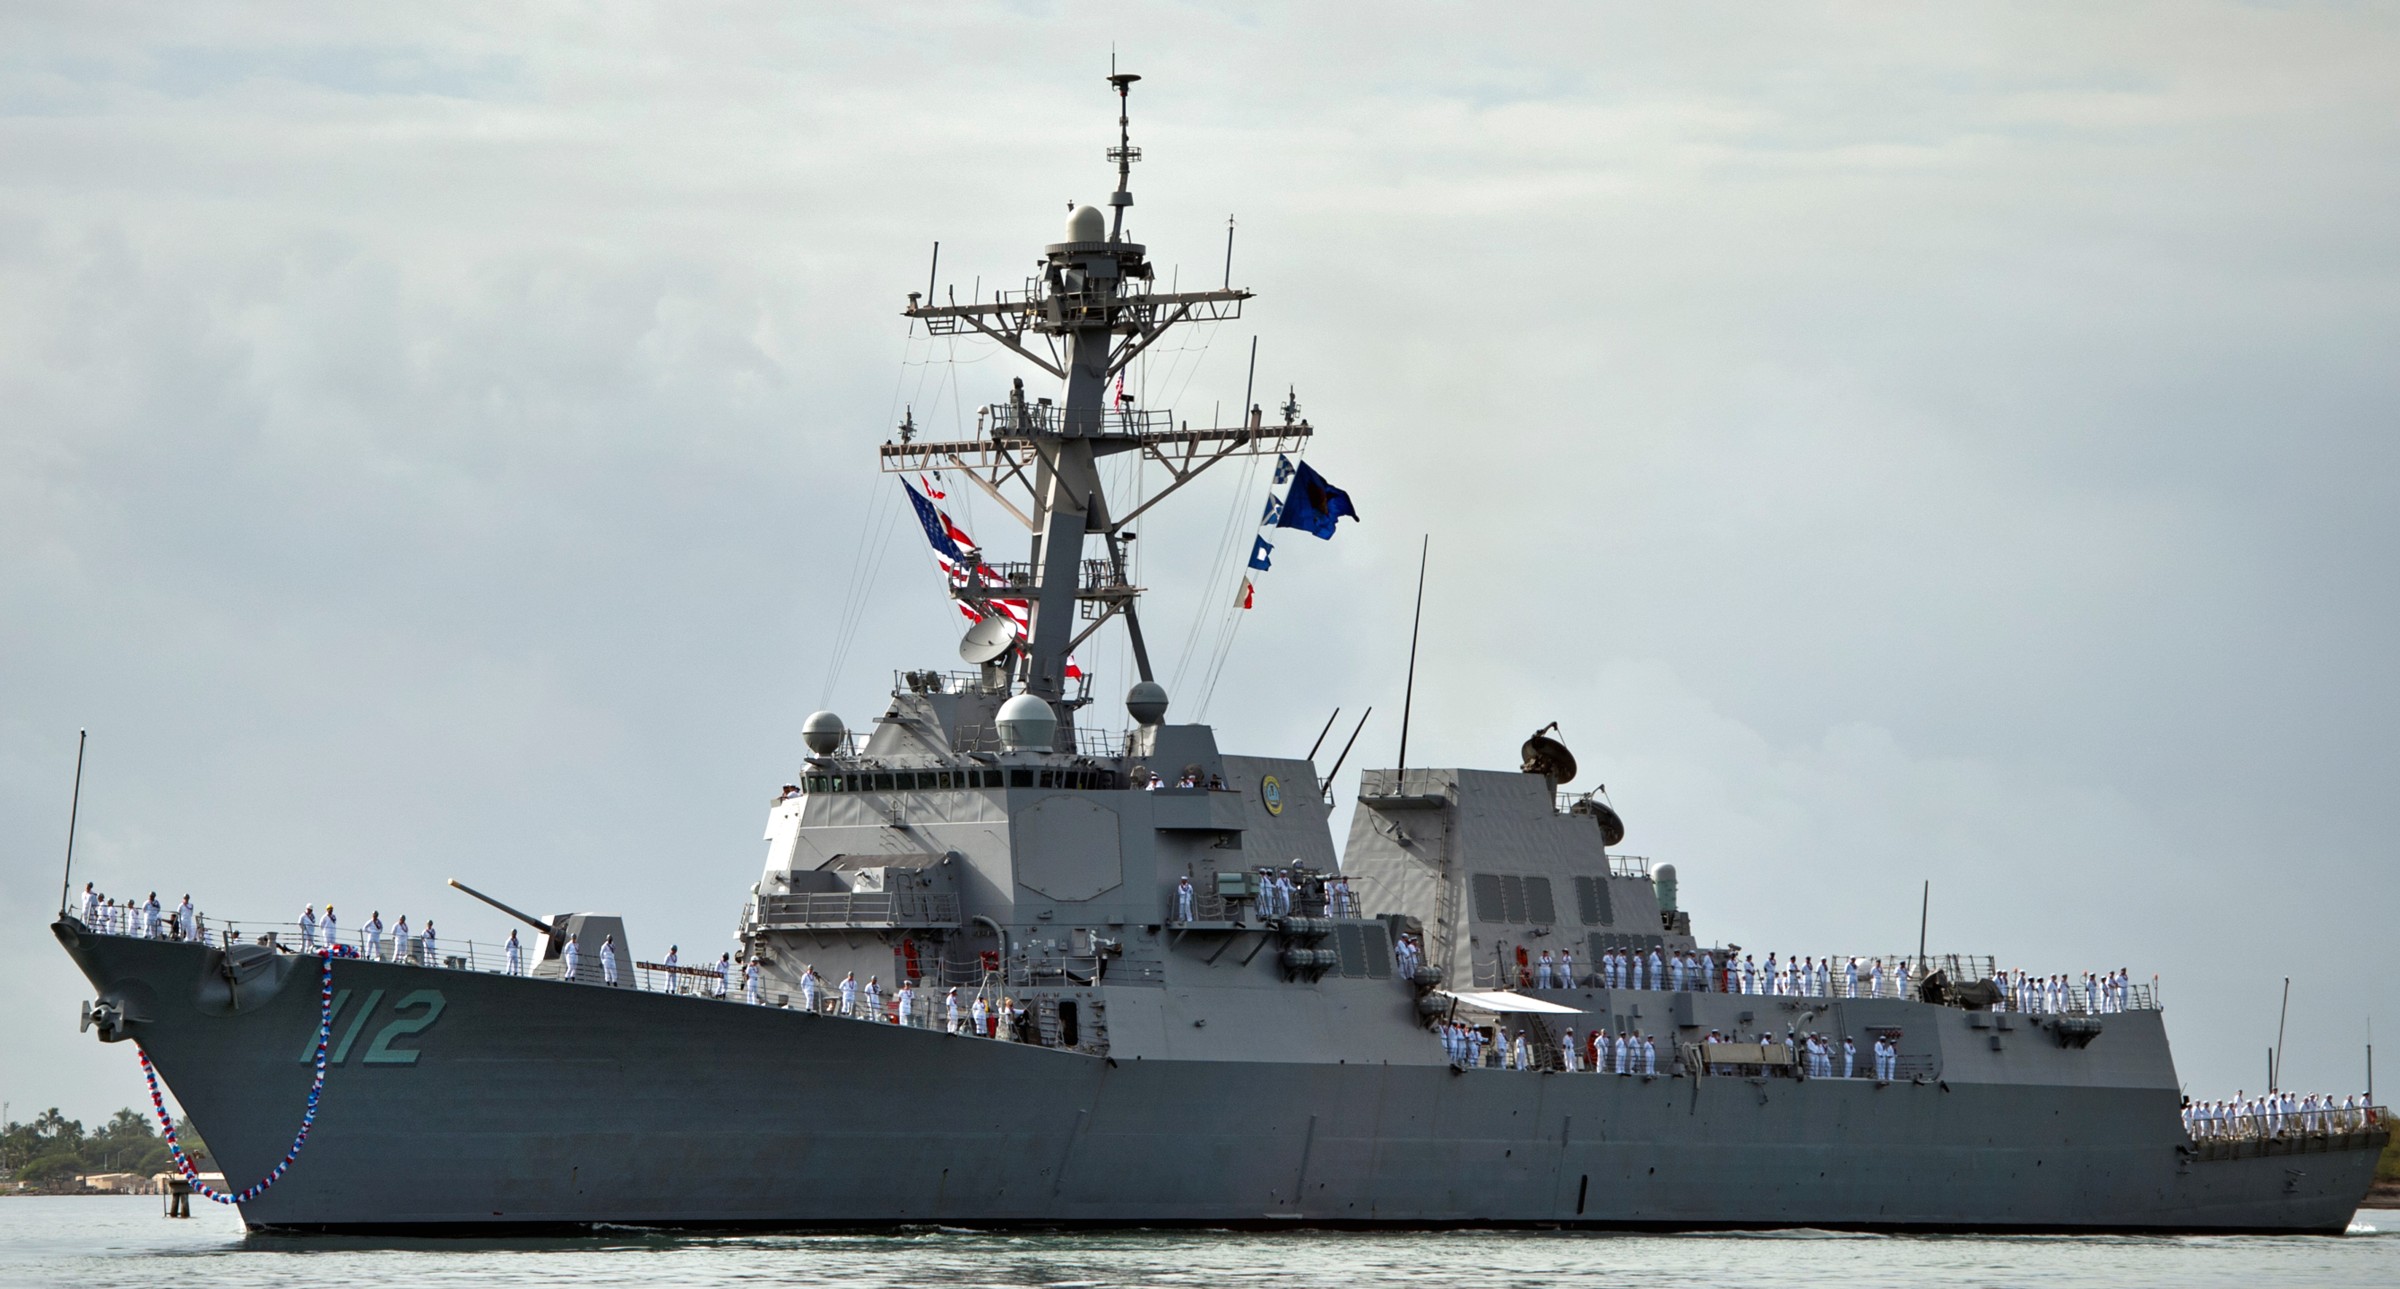 ddg-112 uss michael murphy arleigh burke class guided missile destroyer aegis us navy joint base pearl harbor hickam hawaii 73p